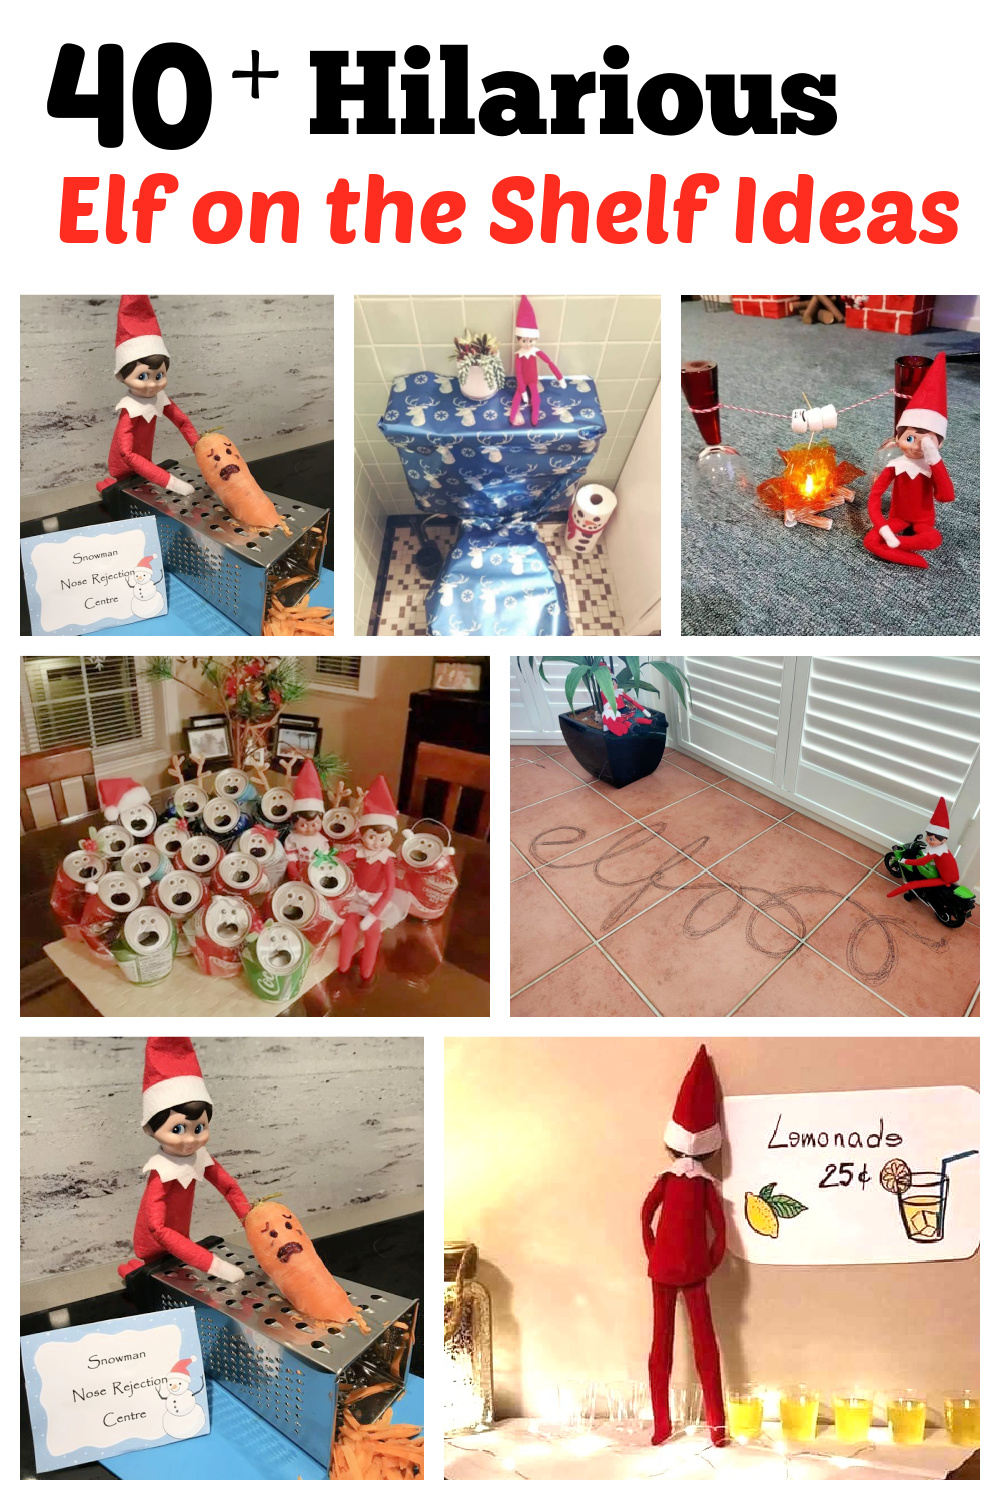 Elf on the Shelf Ideas - the absolute BEST of the best - Paging Fun Mums